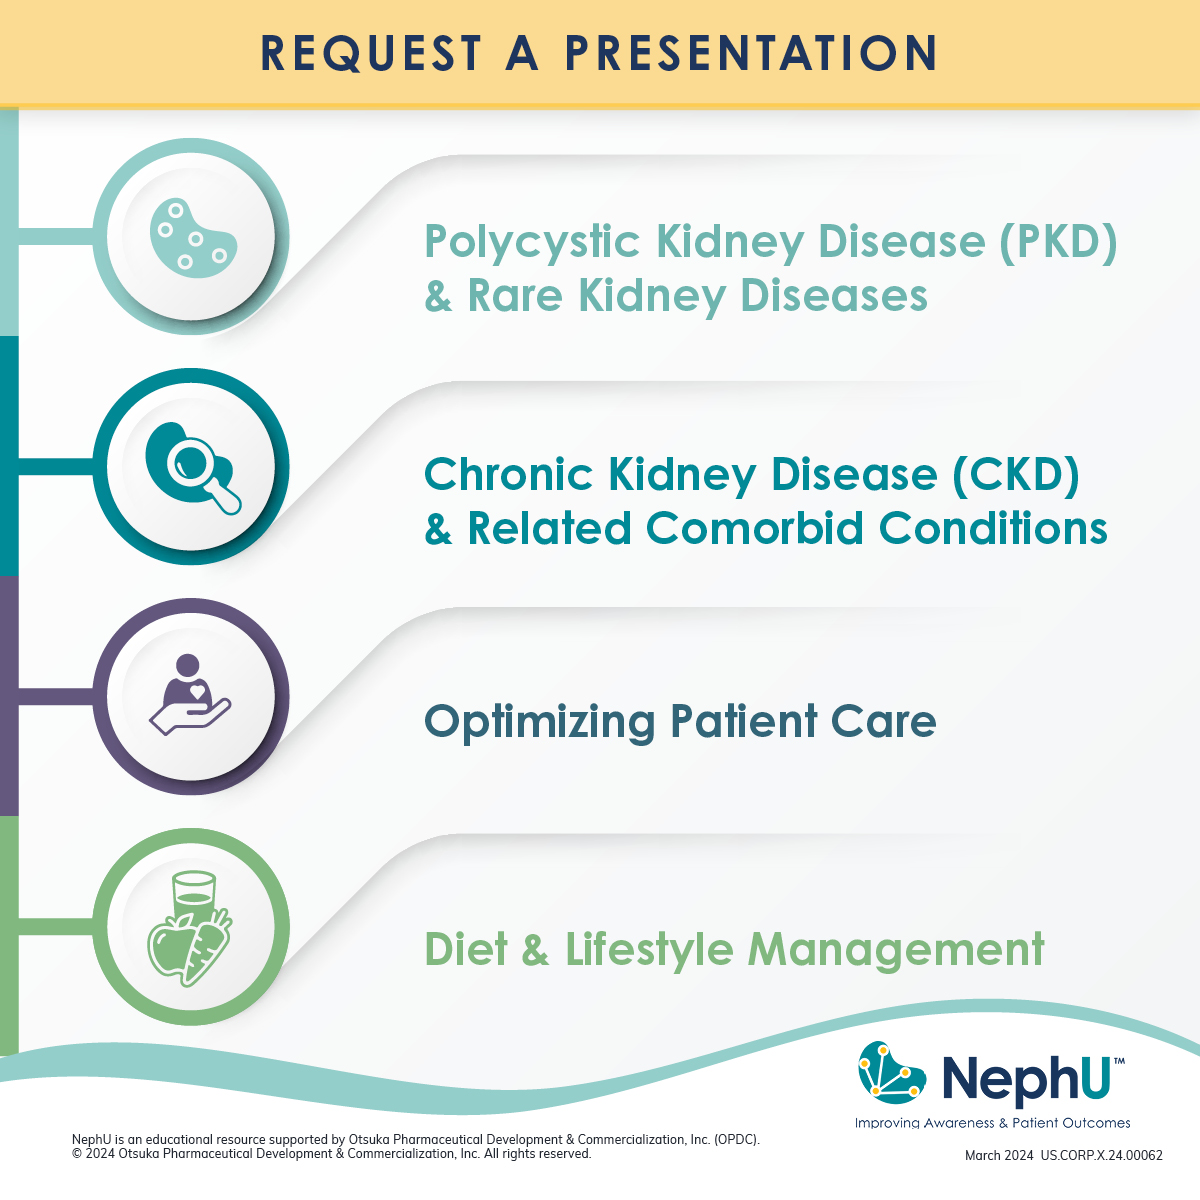 NephU members have premiere access to a broad range of online and in-person educational programs. Enrich yourself and your colleague’s nephrology knowledge by joining and requesting your own presentation today! go.nephu.org/M56d #Nephrology #KidneyEducation #NephU